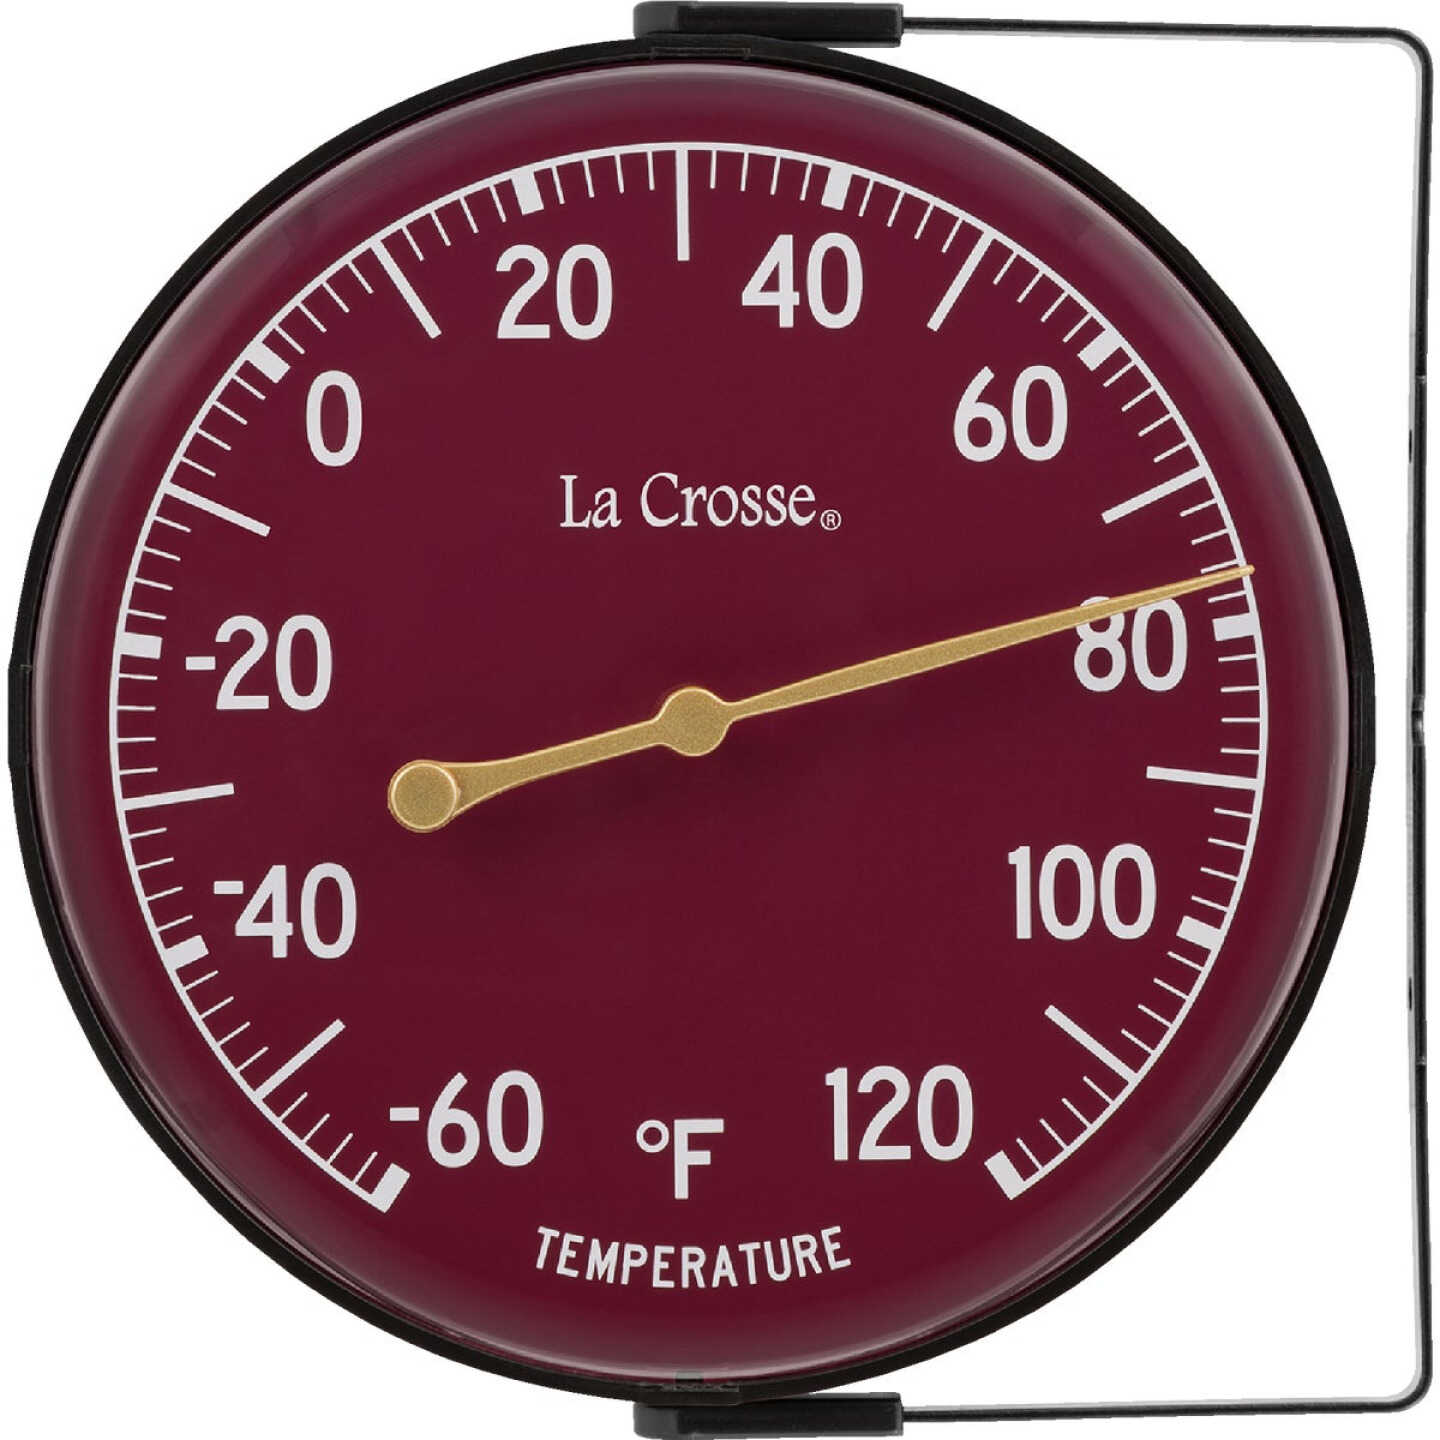 La Crosse Technology Indoor/Outdoor Magnetic Thermometer - Dunham's